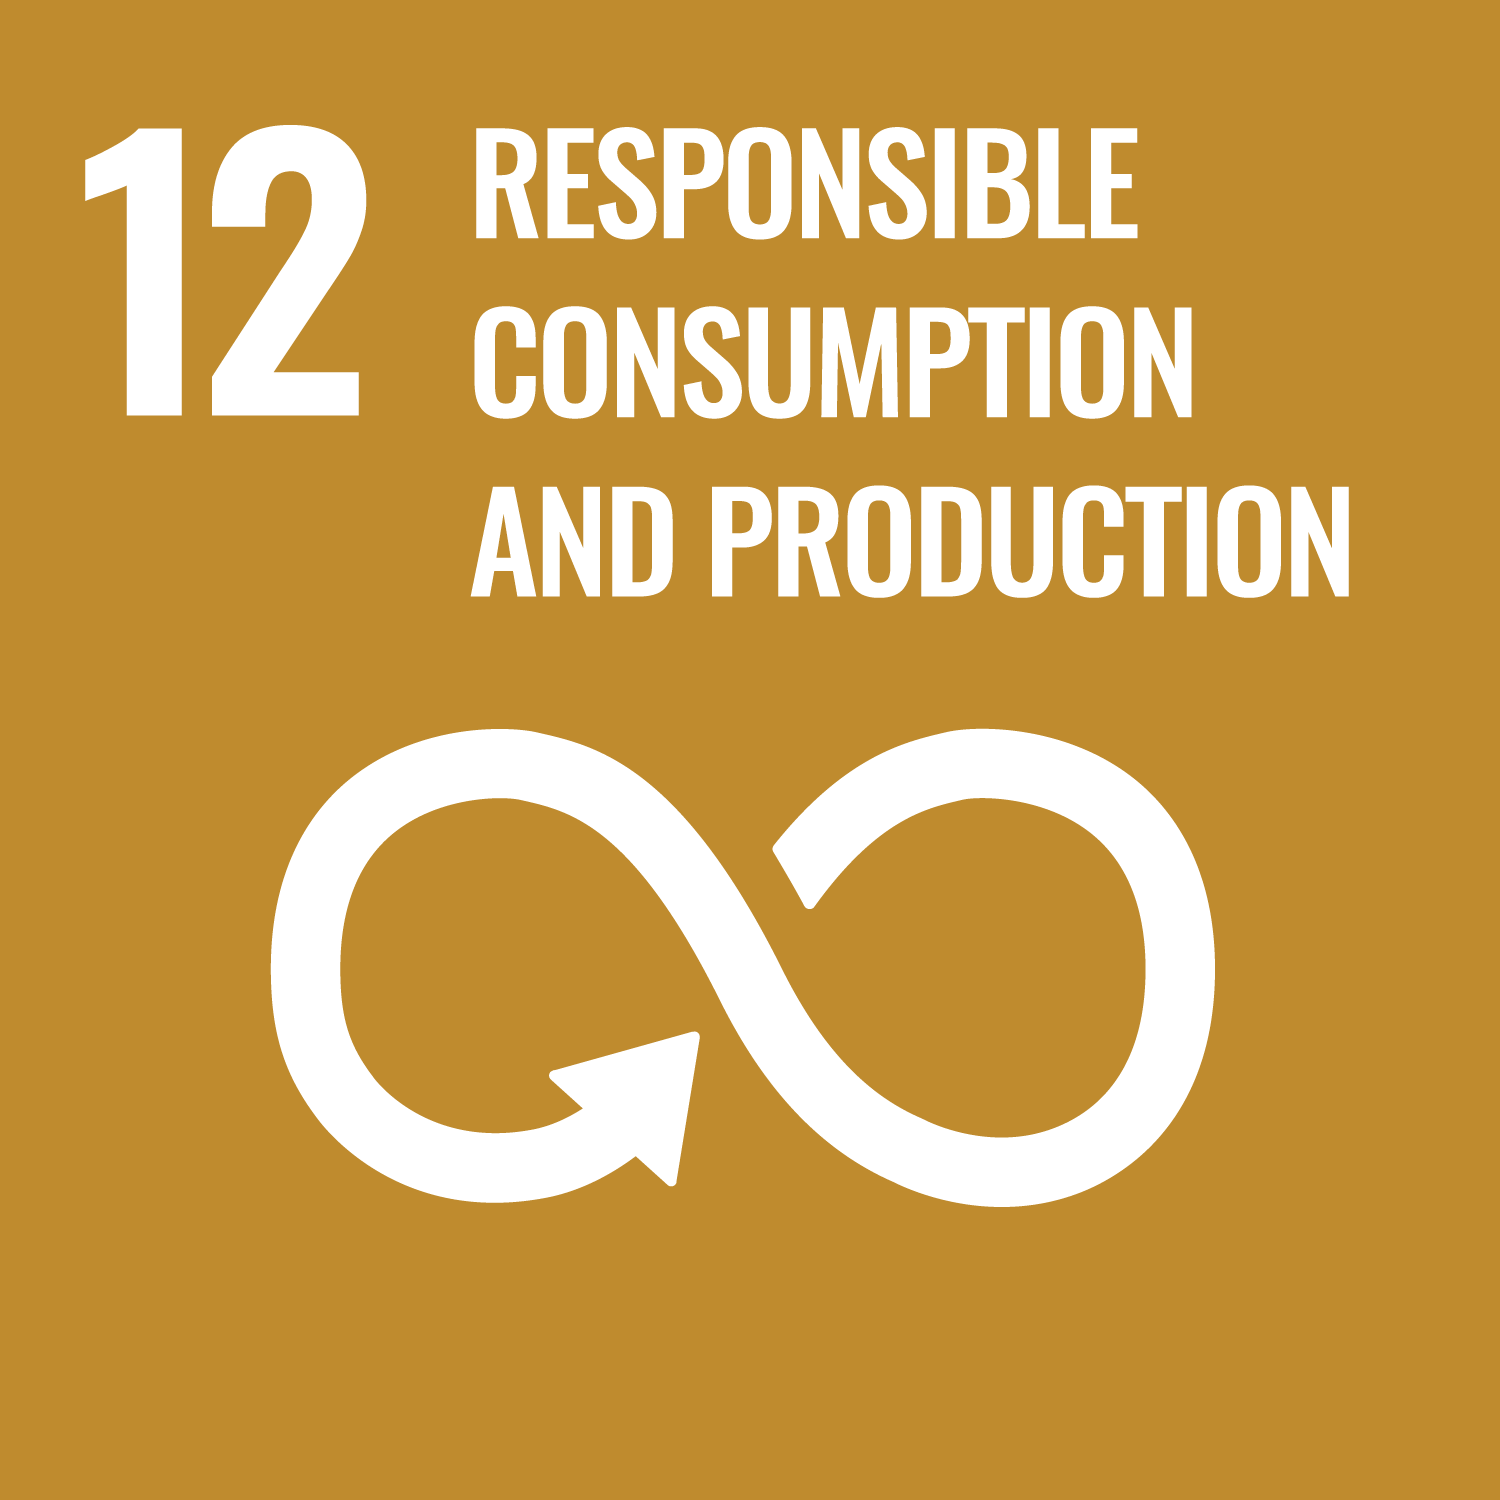 United Nations Sustainable Development Goal Number 12: Responsible Consumption and Production